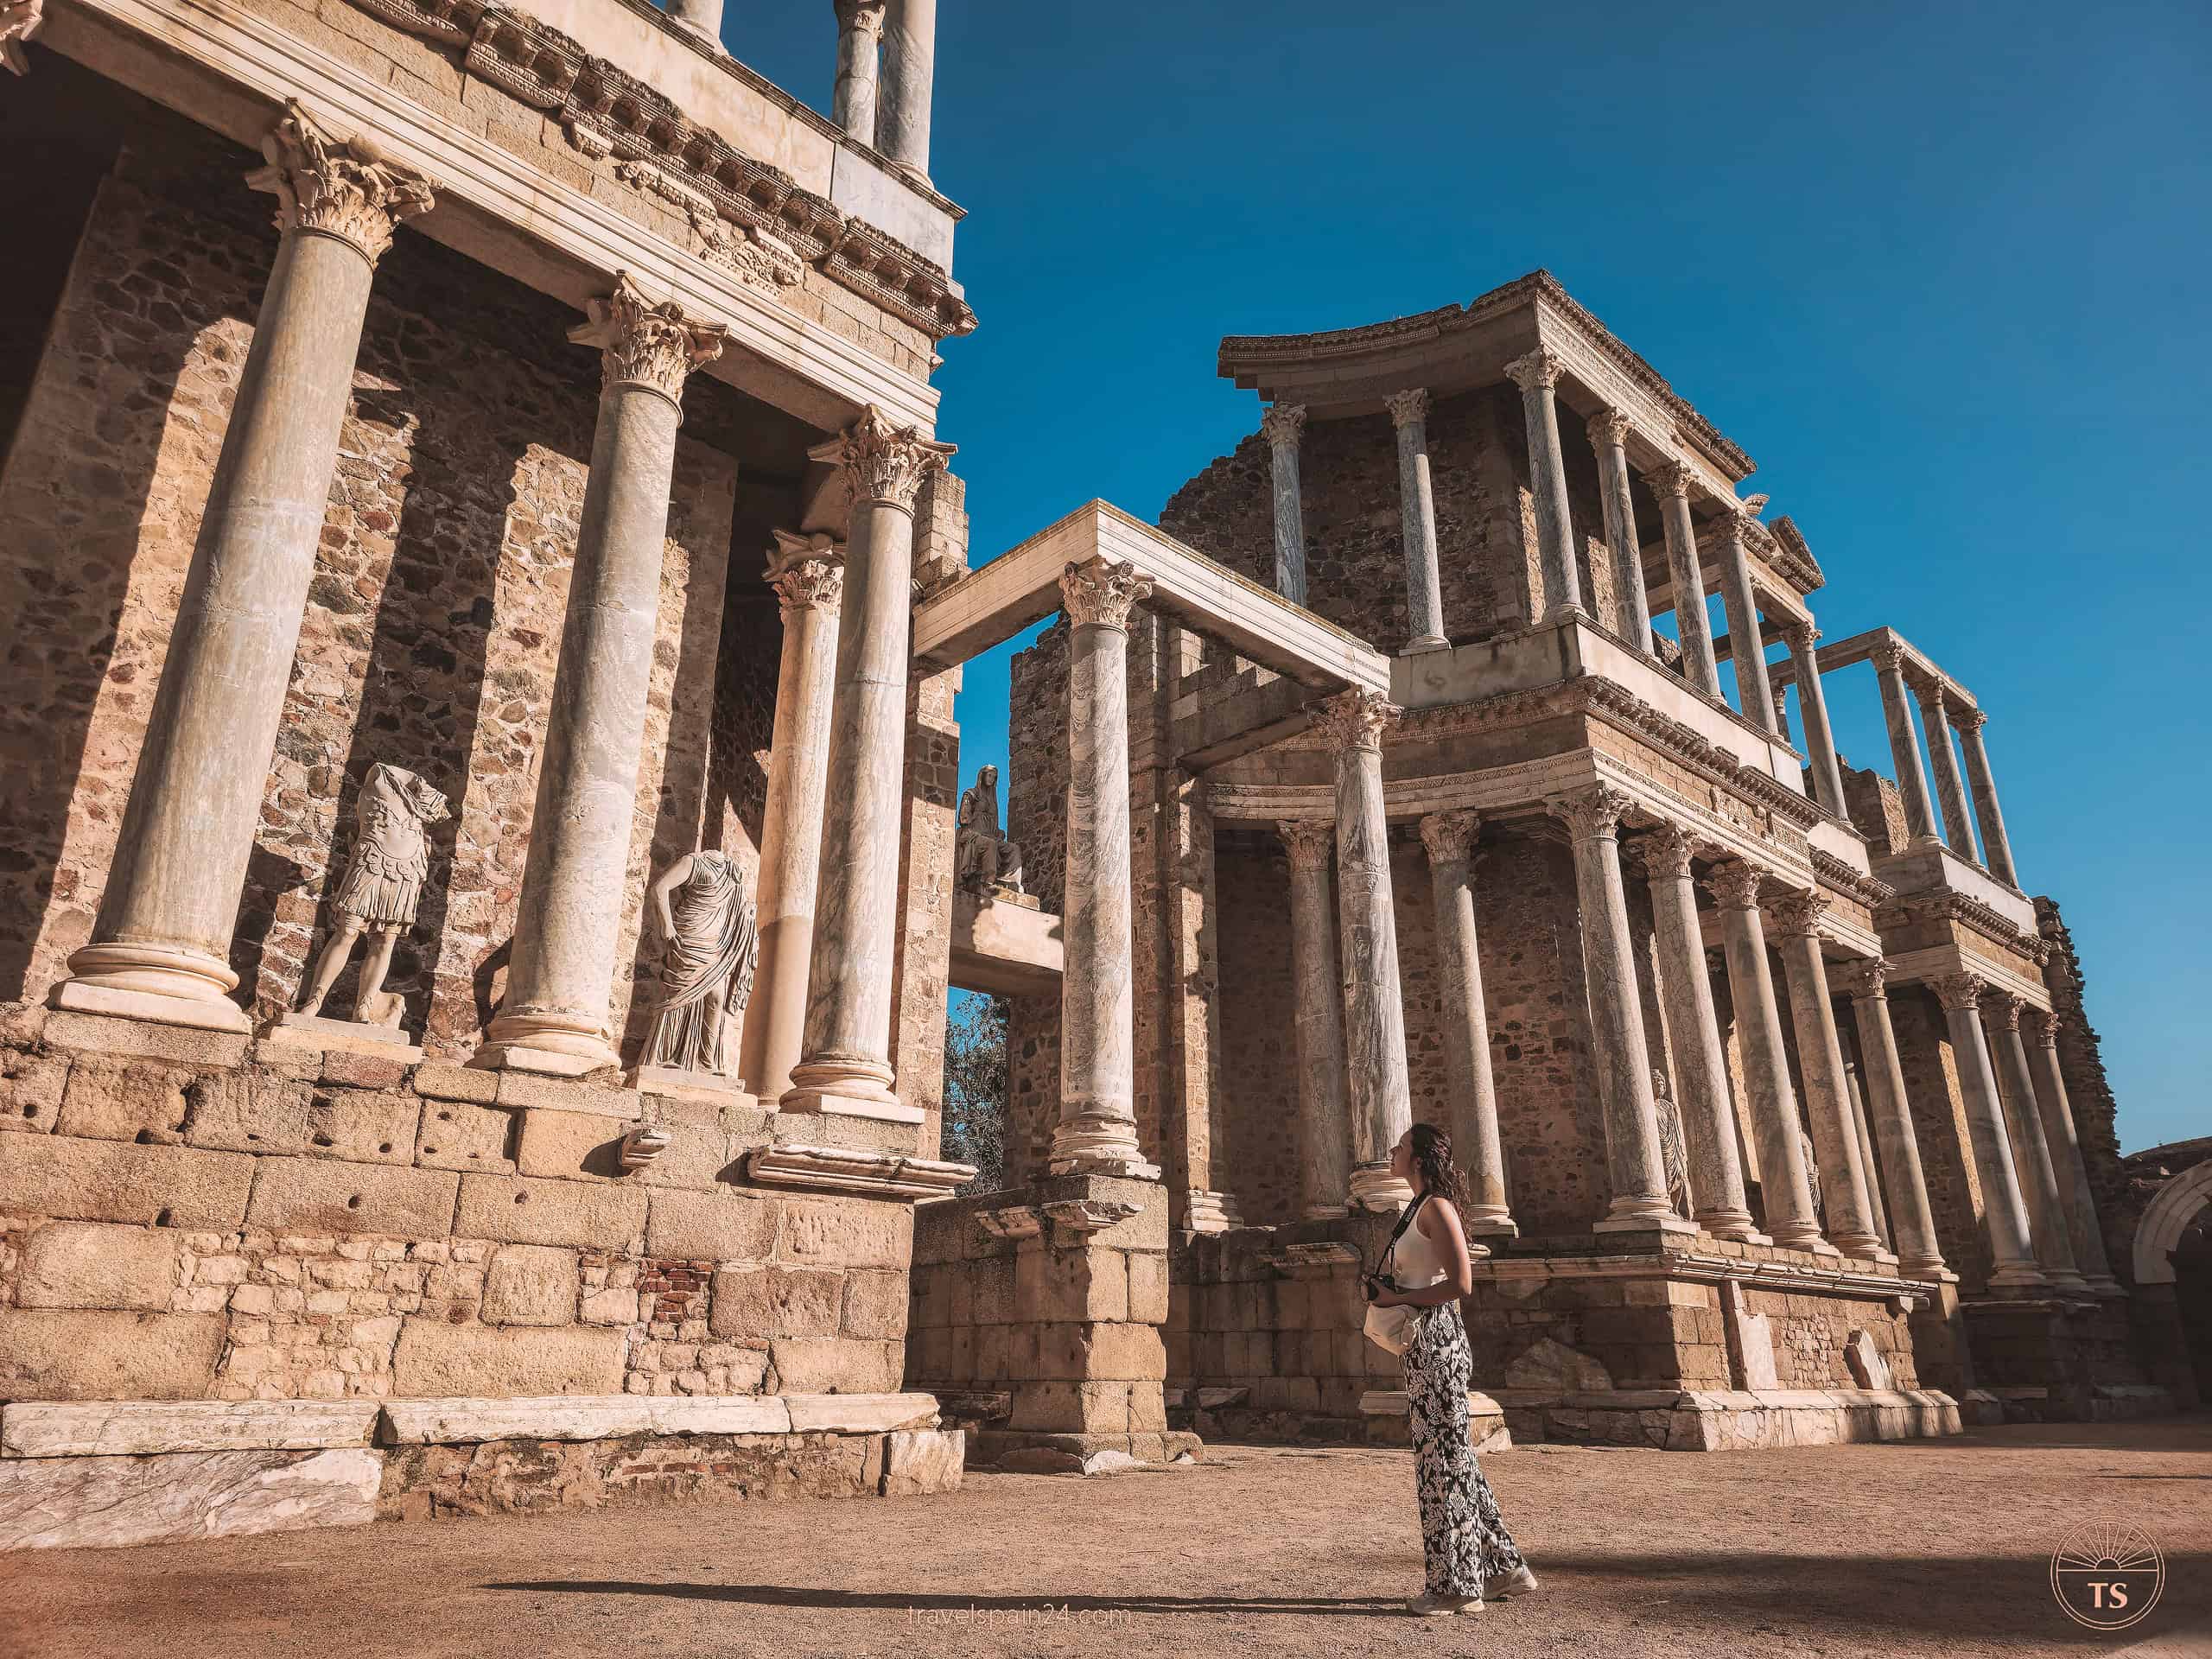 Filipa Ferreira in front of the Roman Theatre in Mérida, looking up at the impressive columns and ancient statues, enjoying the historical ambiance on a sunny day.